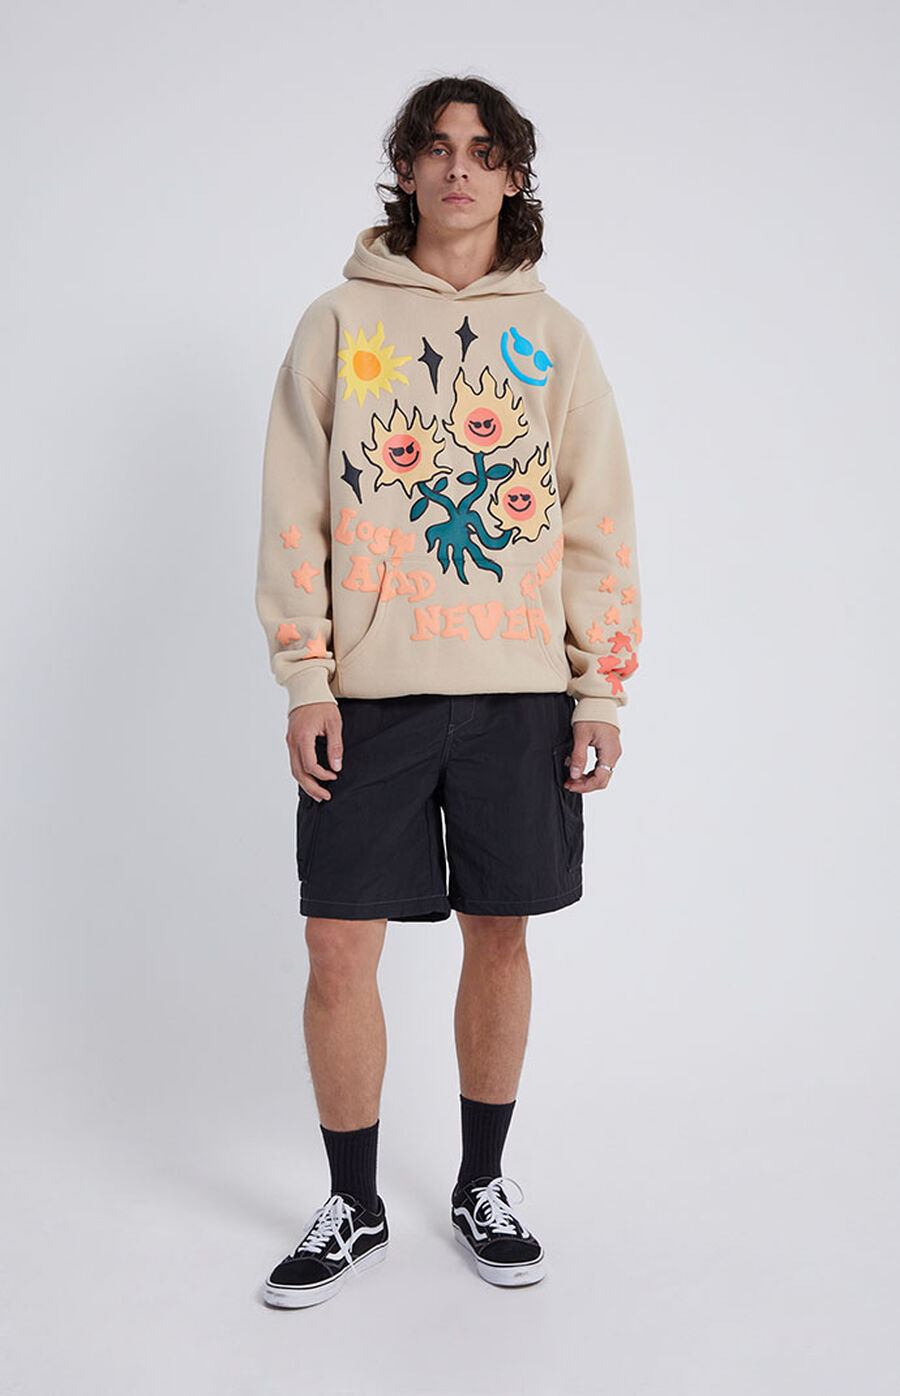 PacSun Lost & Found Hoodie | PacSun